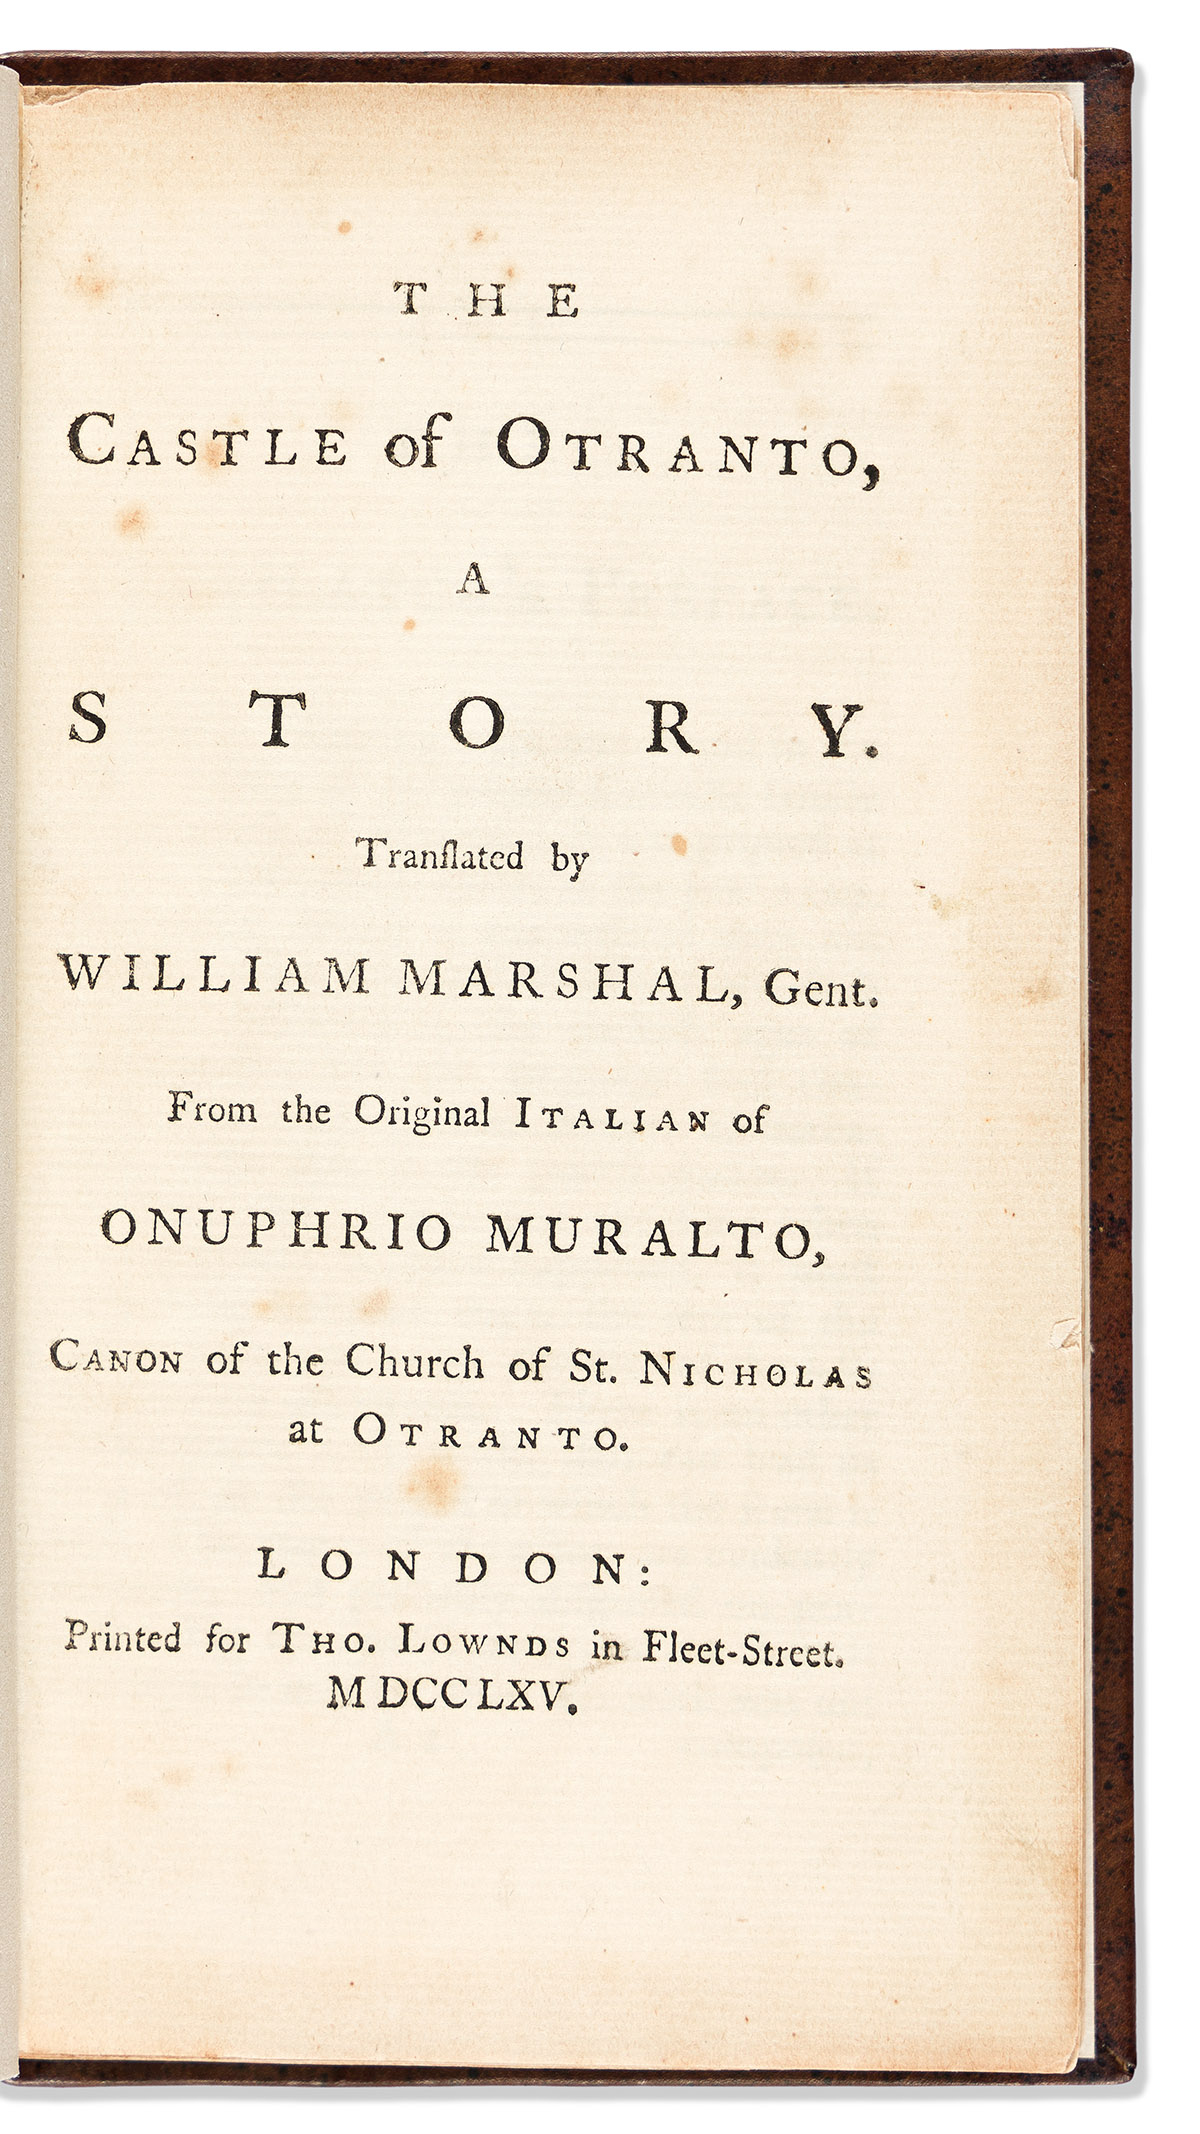 Walpole, Horace (1717-1797) The Castle of Otranto, a Story. Translated by William Marshal, Gent. From the Original Italian of Onuphrio